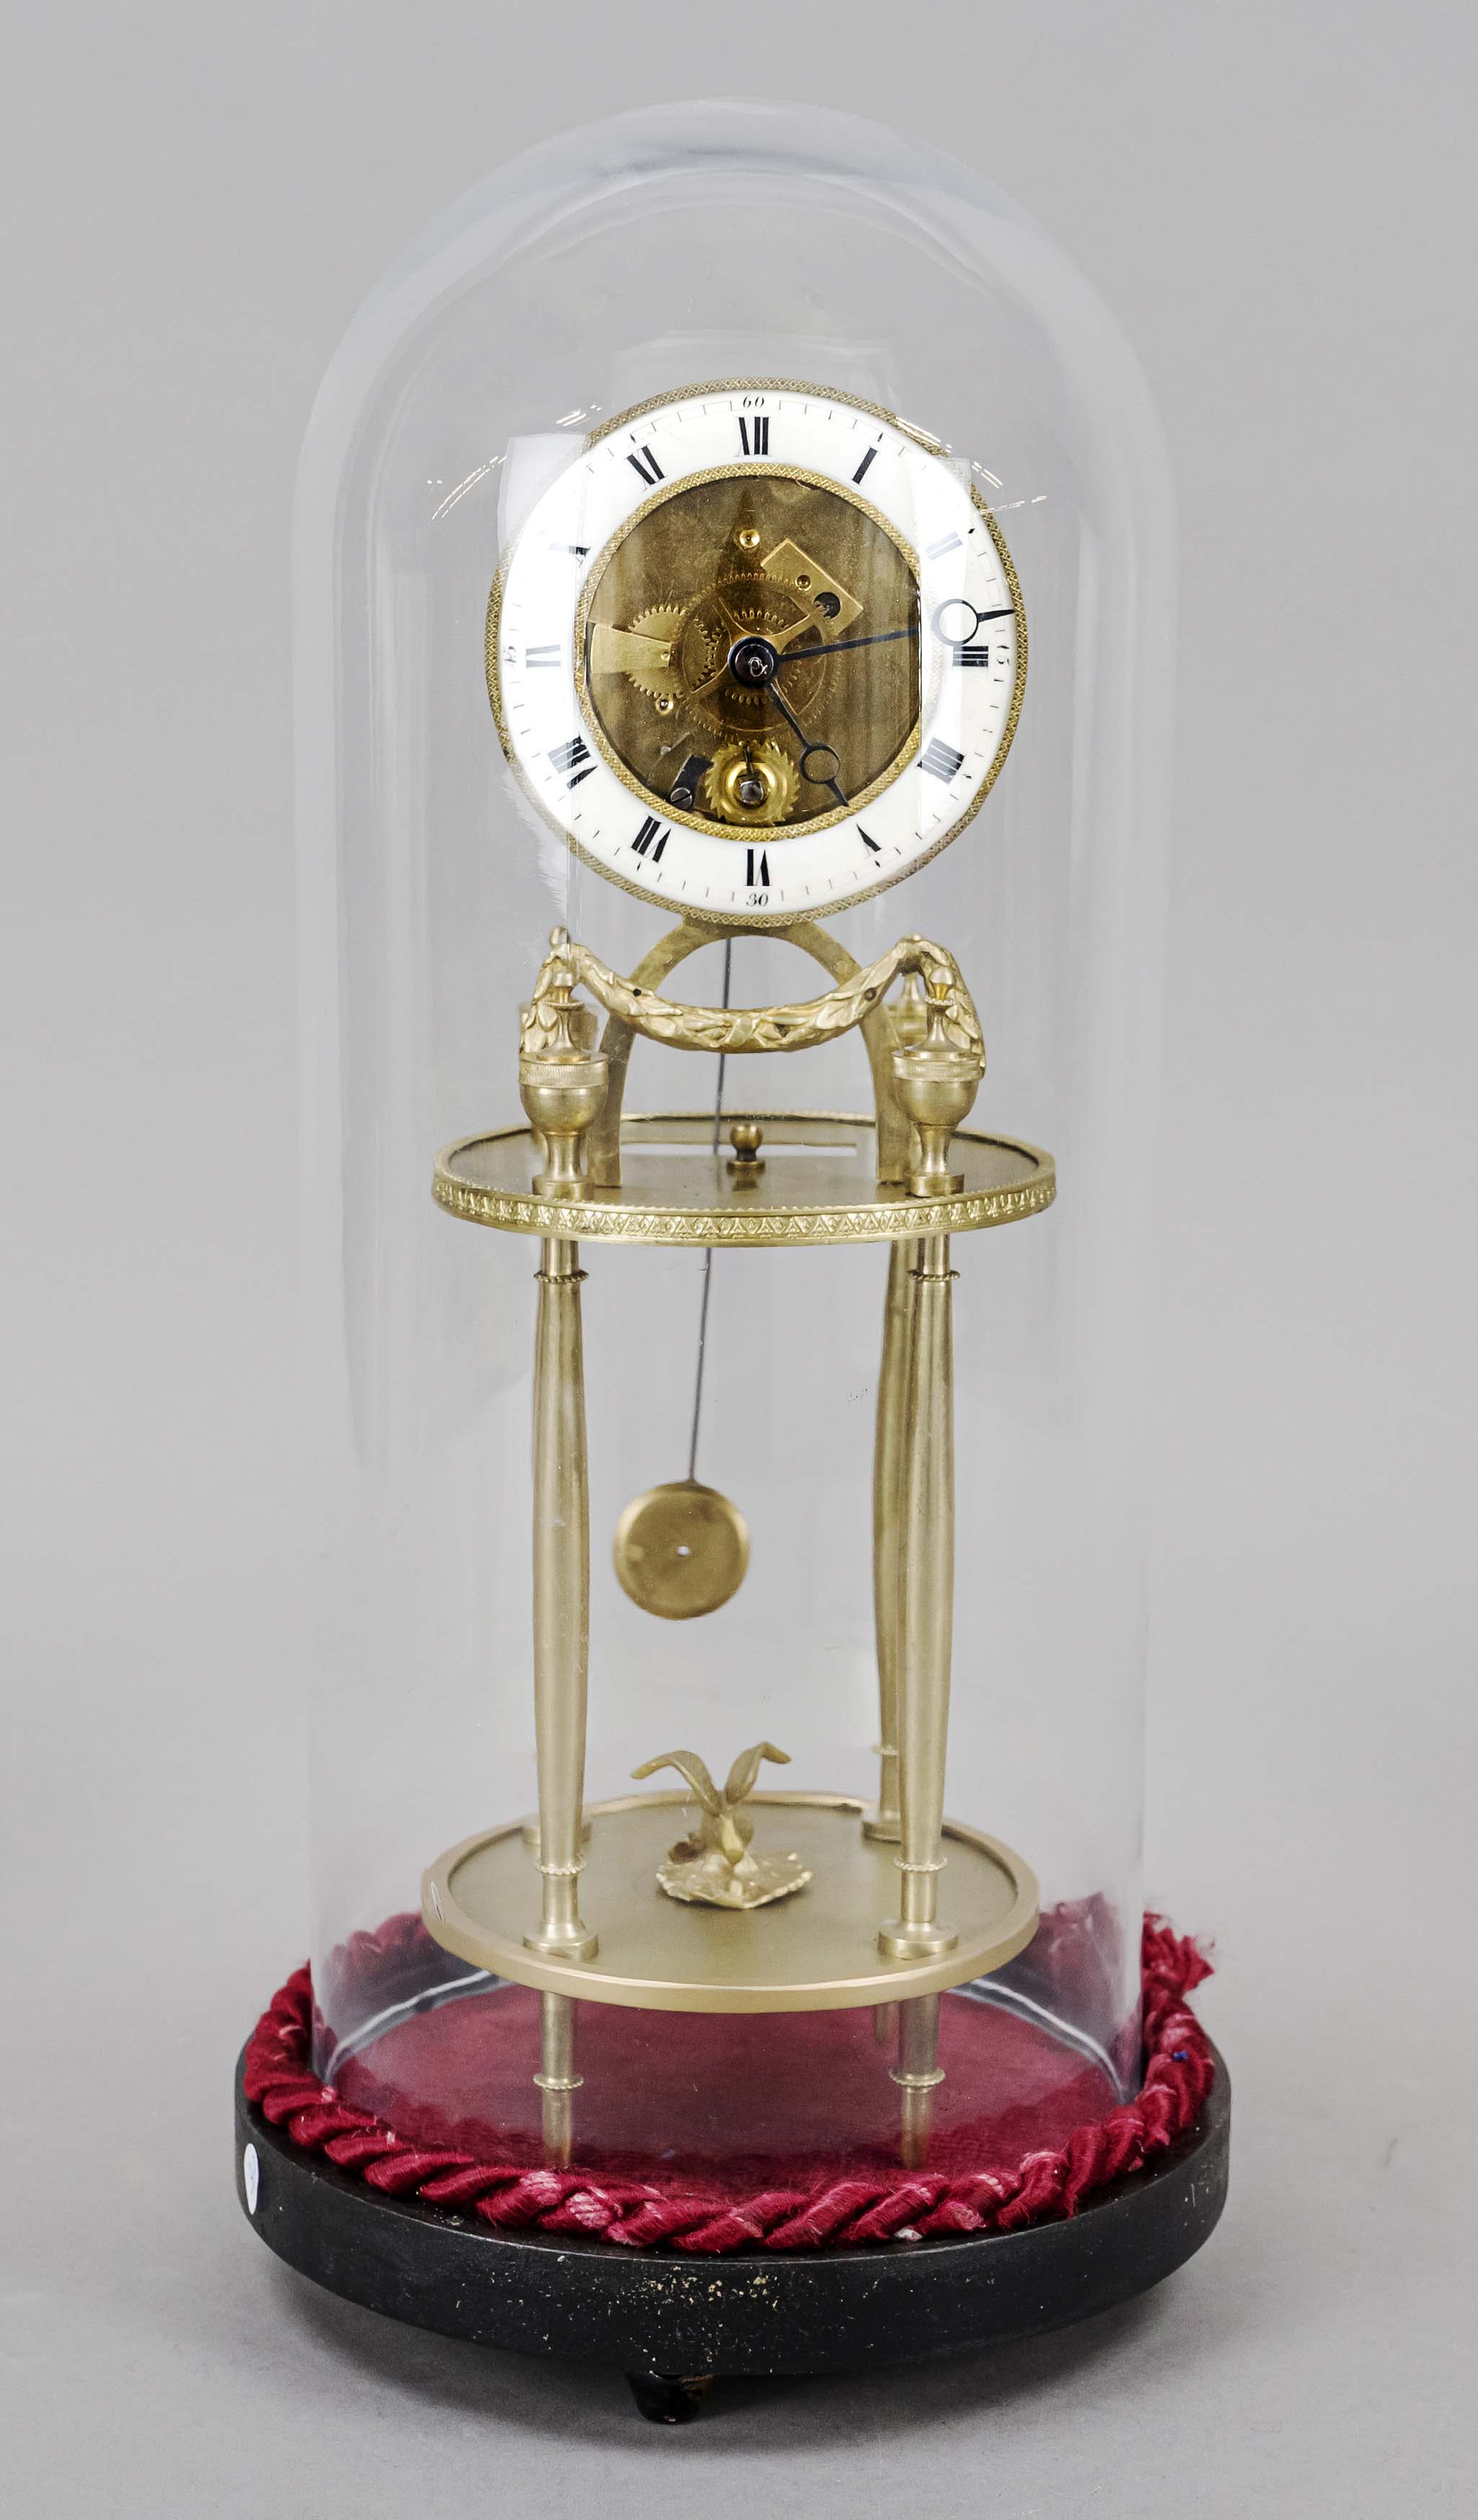 4 Column clock with base and glass dome, 1st half 19th century, gilt brass, decorated with